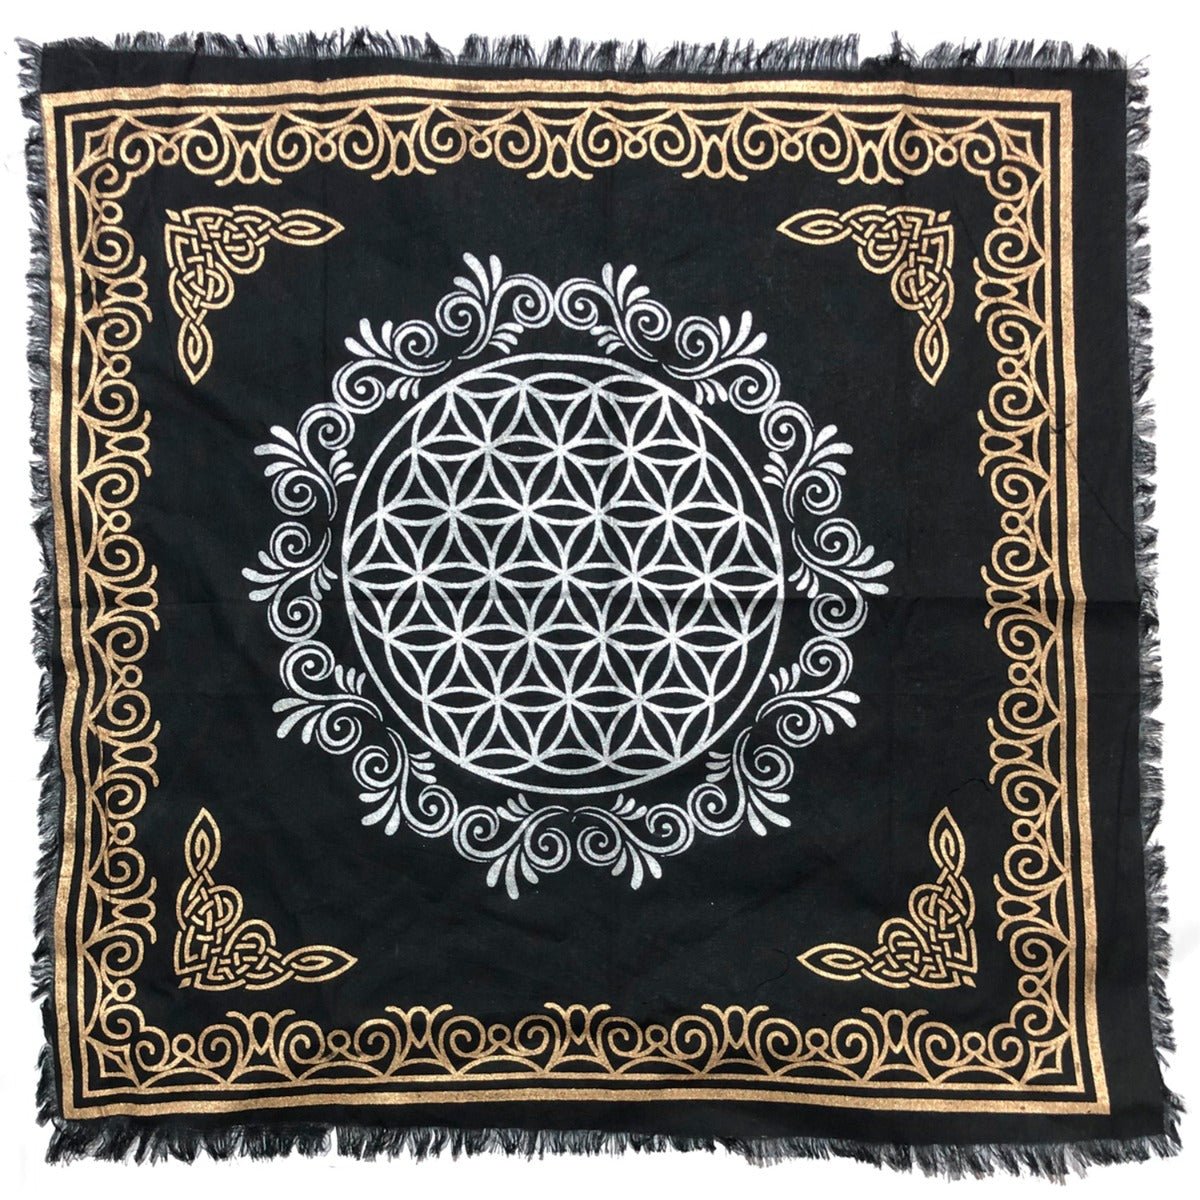 Celtic Flower of Life Altar Cloth, 18 inch - 13 Moons